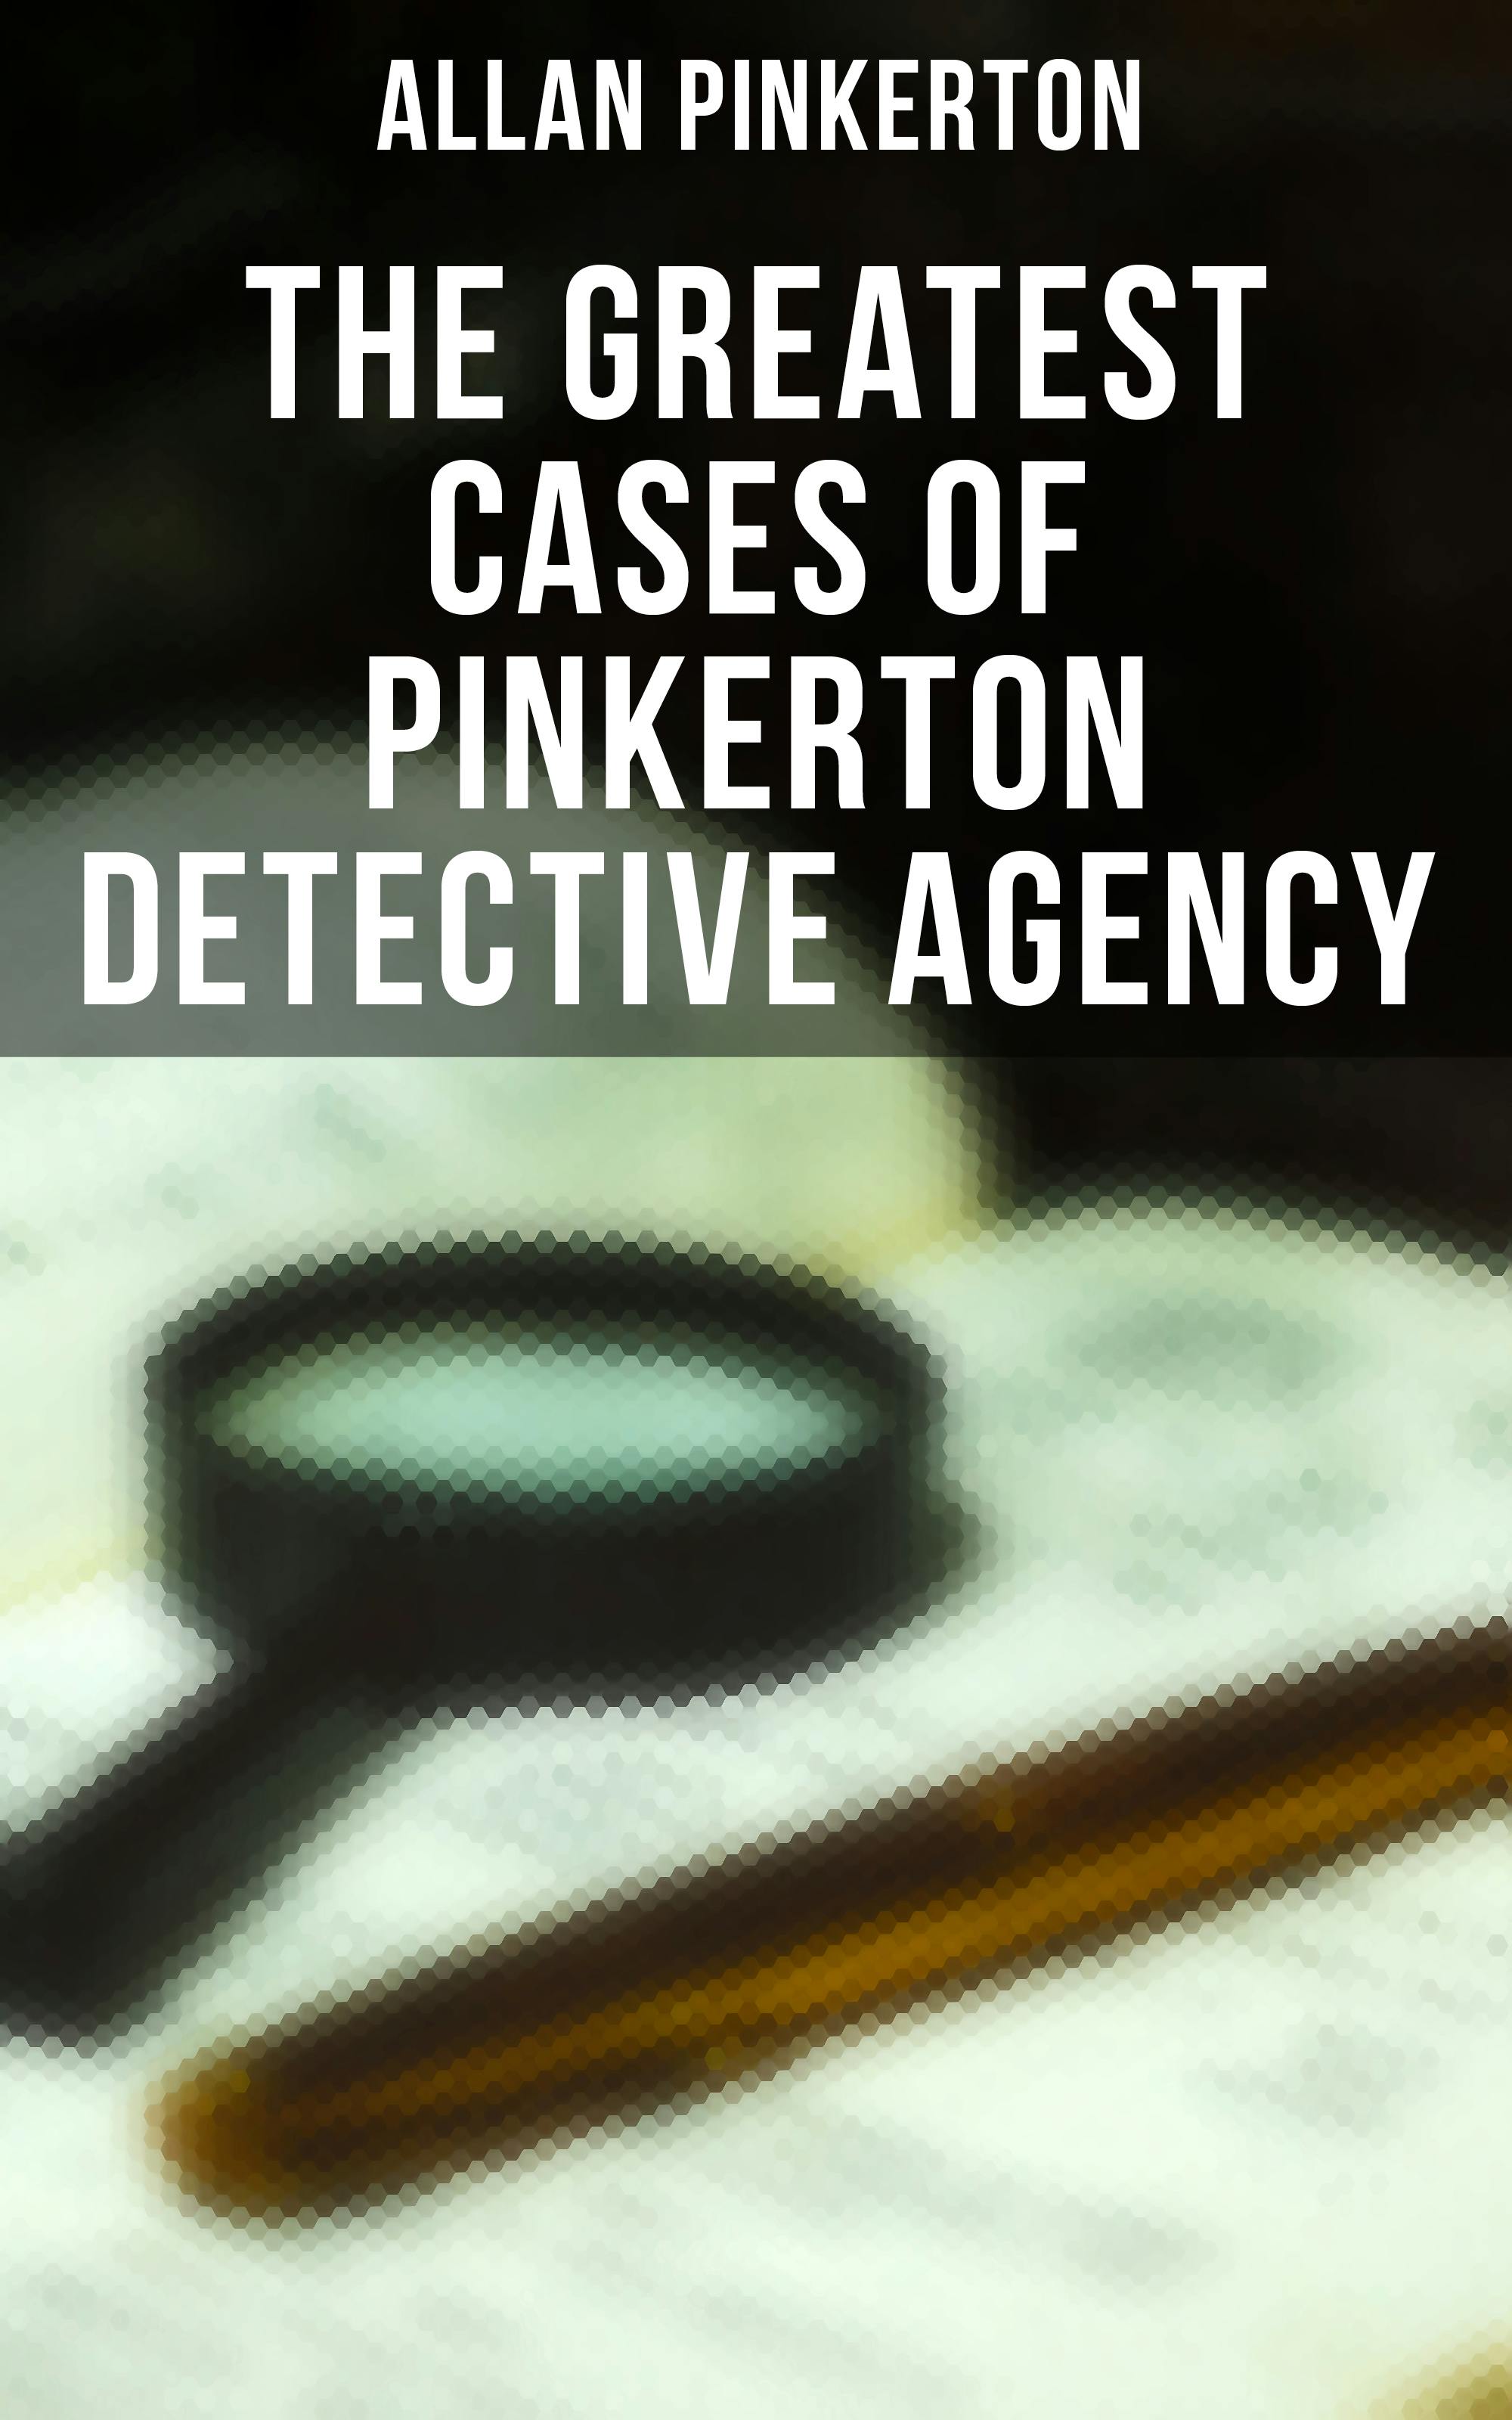 The Greatest Cases of Pinkerton Detective Agency - Allan Pinkerton